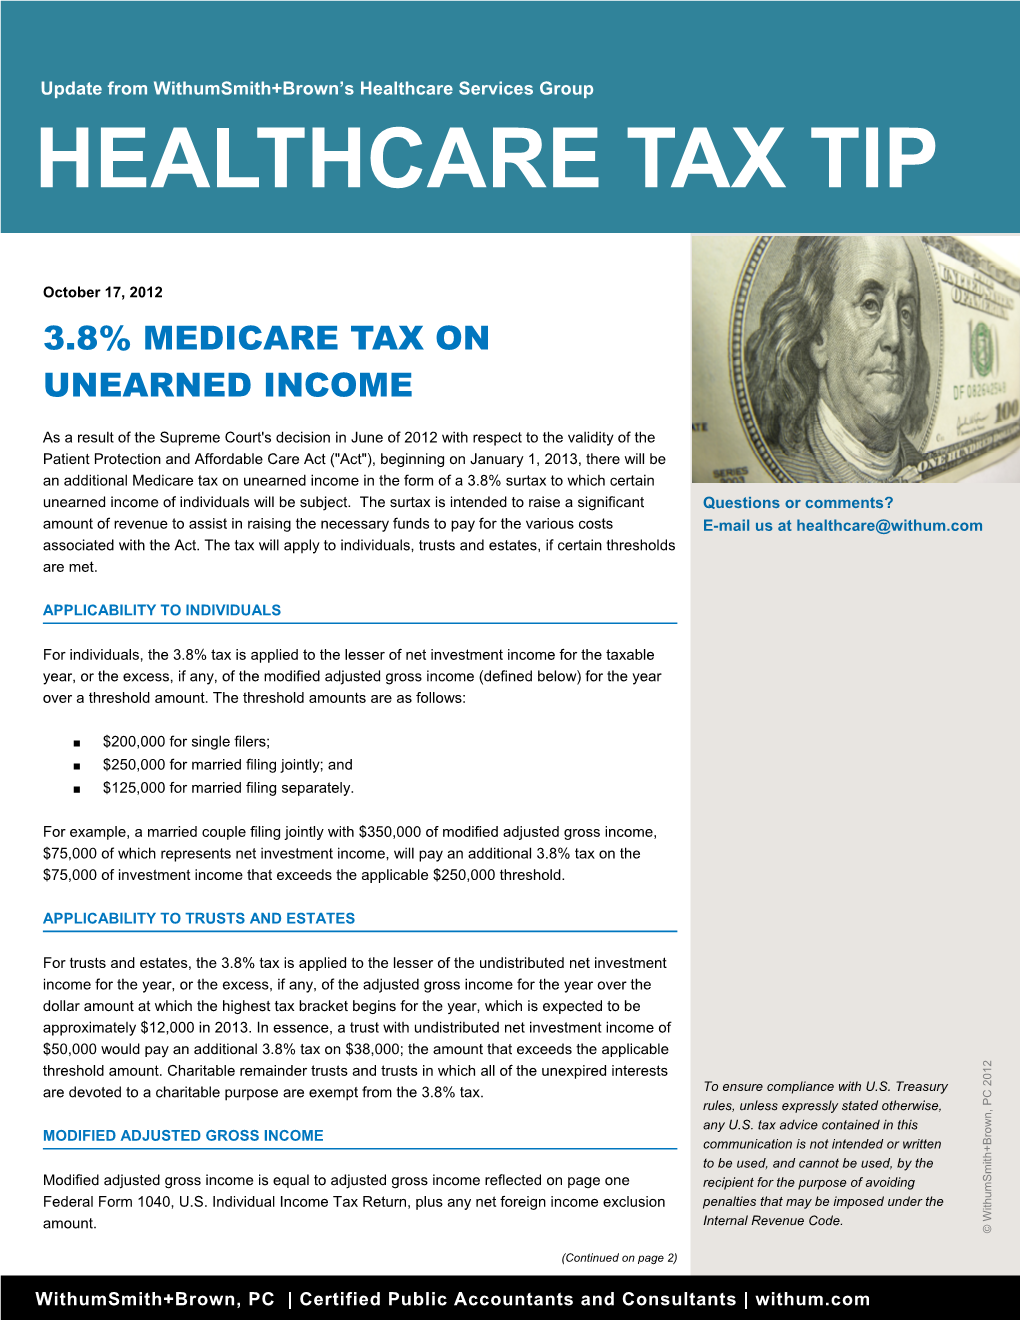 3.8% Medicare Tax on Unearned Income